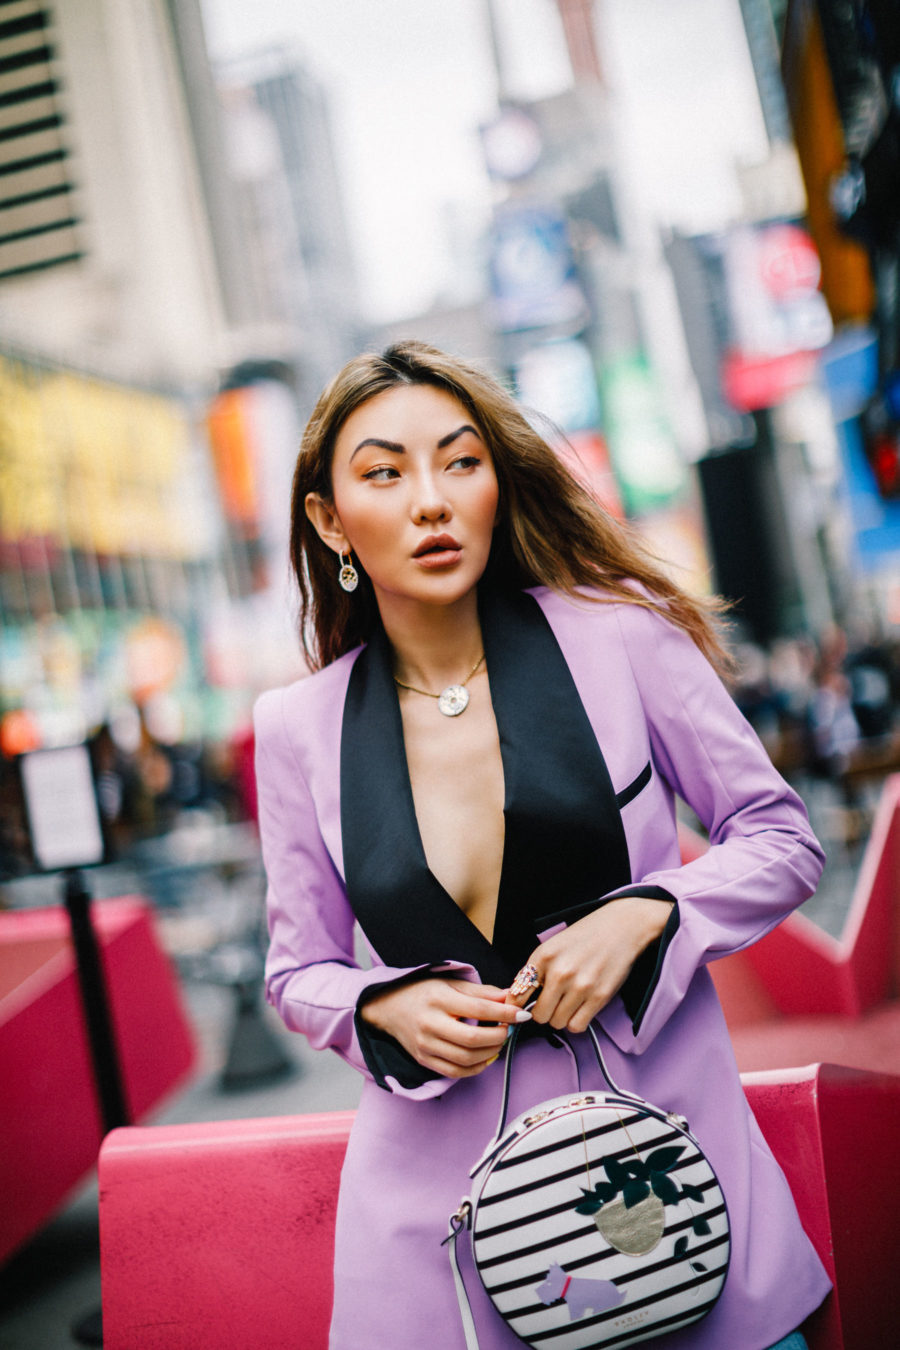 essica wang wearing lavender blazer and shares the most amazing concealers // Jessica Wang - Notjessfashion.com